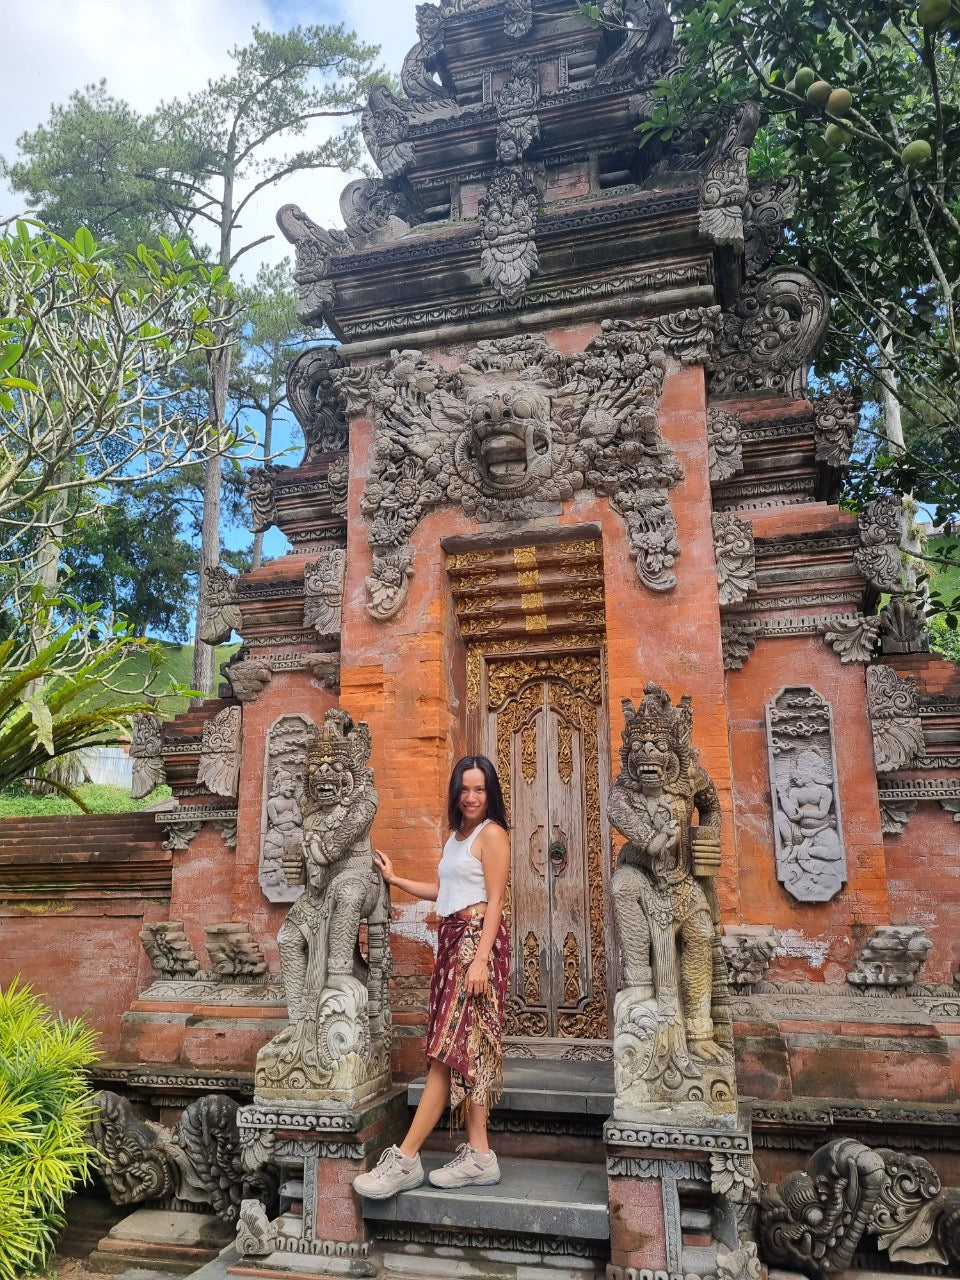 A8C: (3 DAYS) Bali Adventure! Nature's Wonders Call With Majestic Volcanic Peaks, Beach Treasures And Sacred Water Temple